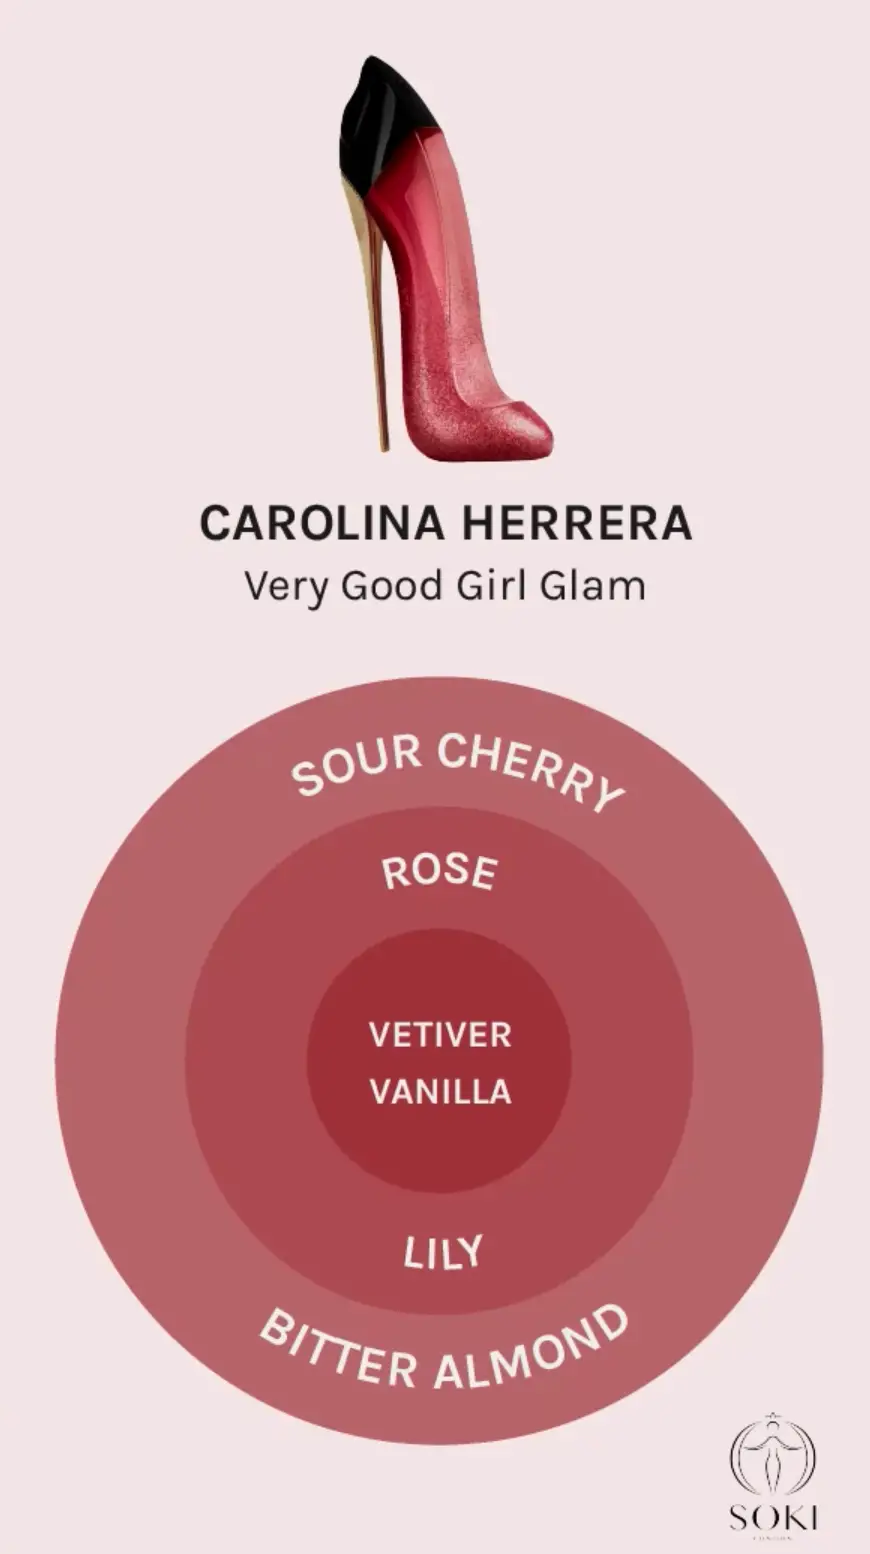 Carolina Herrera Very Good Girl Glam new floral woody perfume guide to  scents